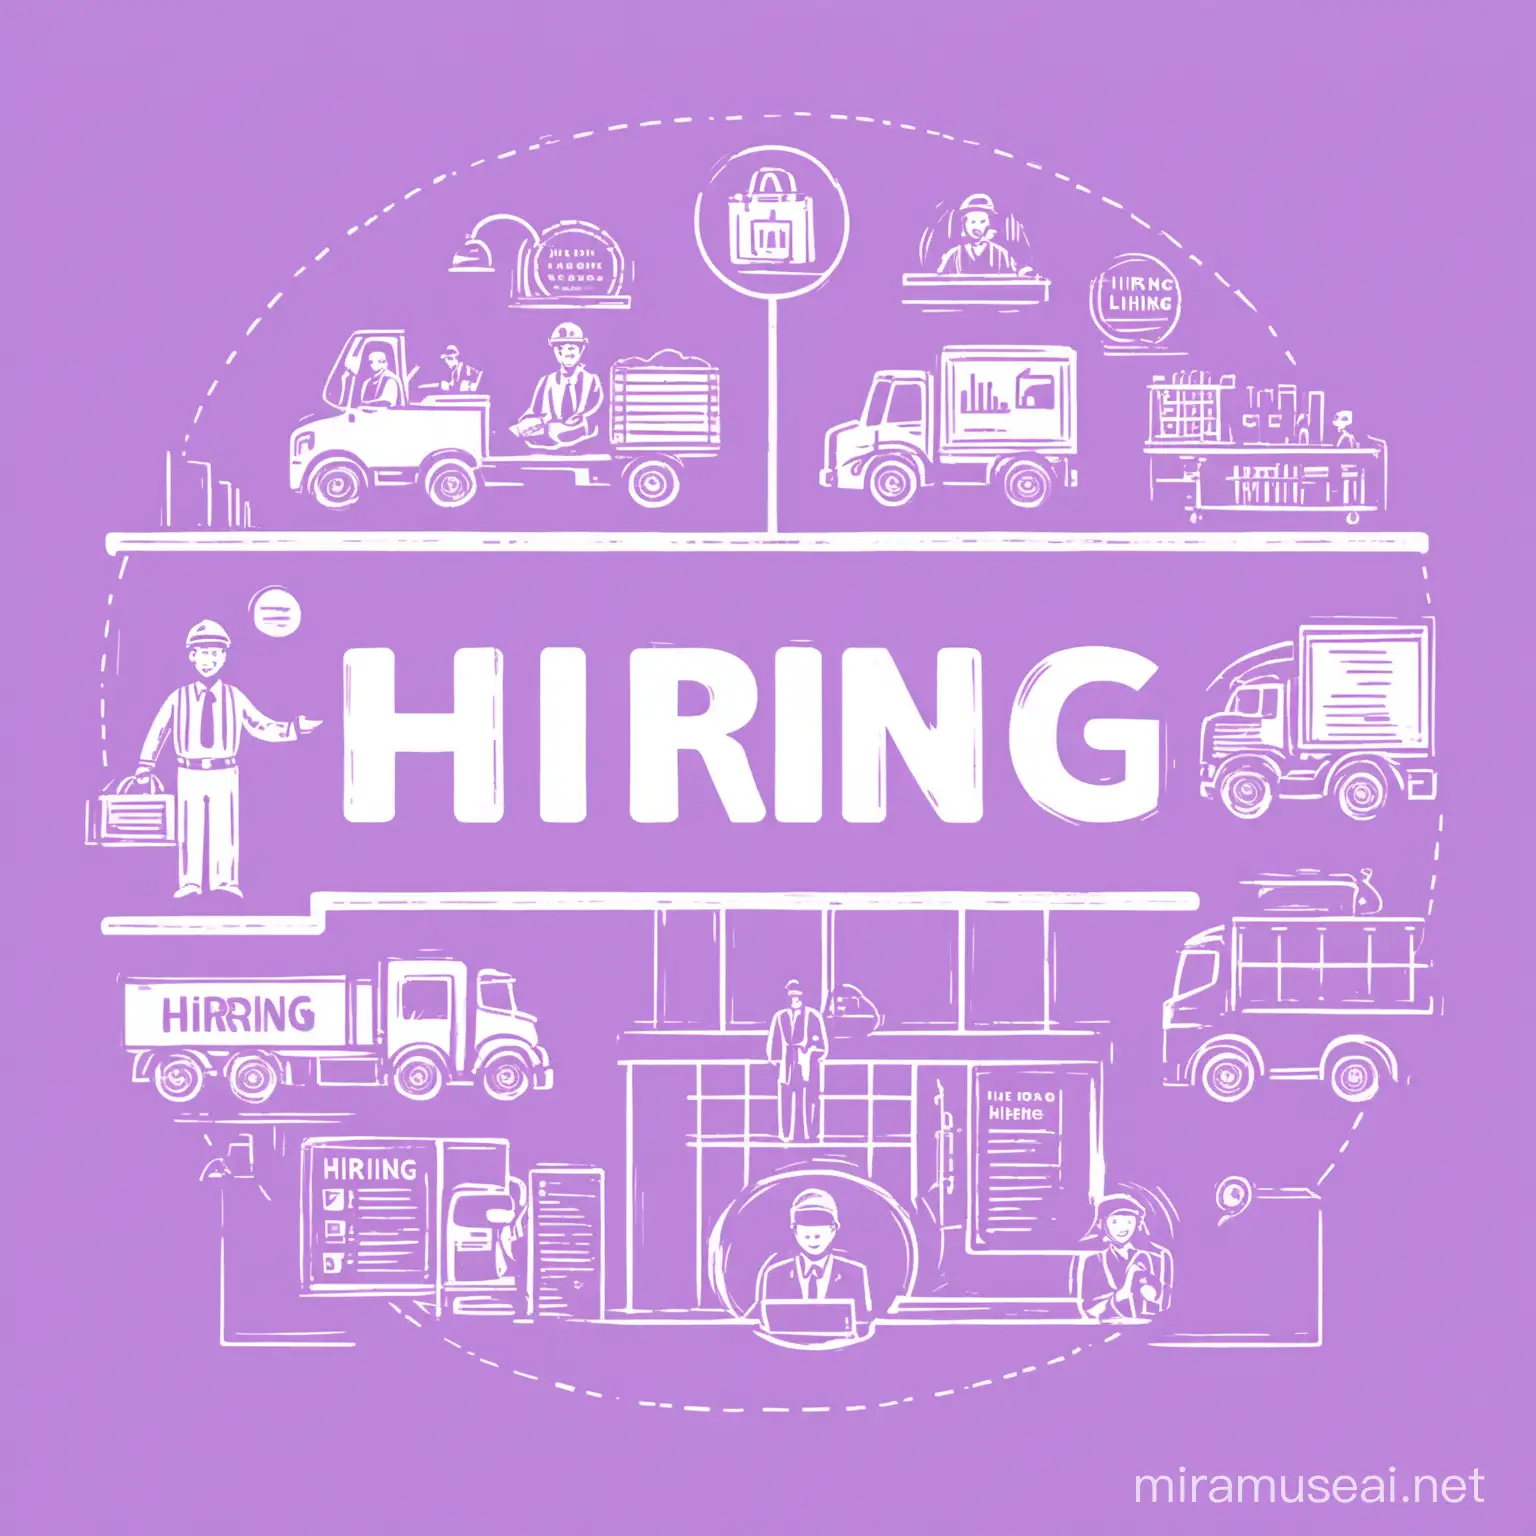 An image suitable for posting on LinkedIn I would like to hire for legal consultancy, sales manager, food industry specialist, truck driver, laborer, accountant and the word "HIRING" is highlighted with a pale purple theme